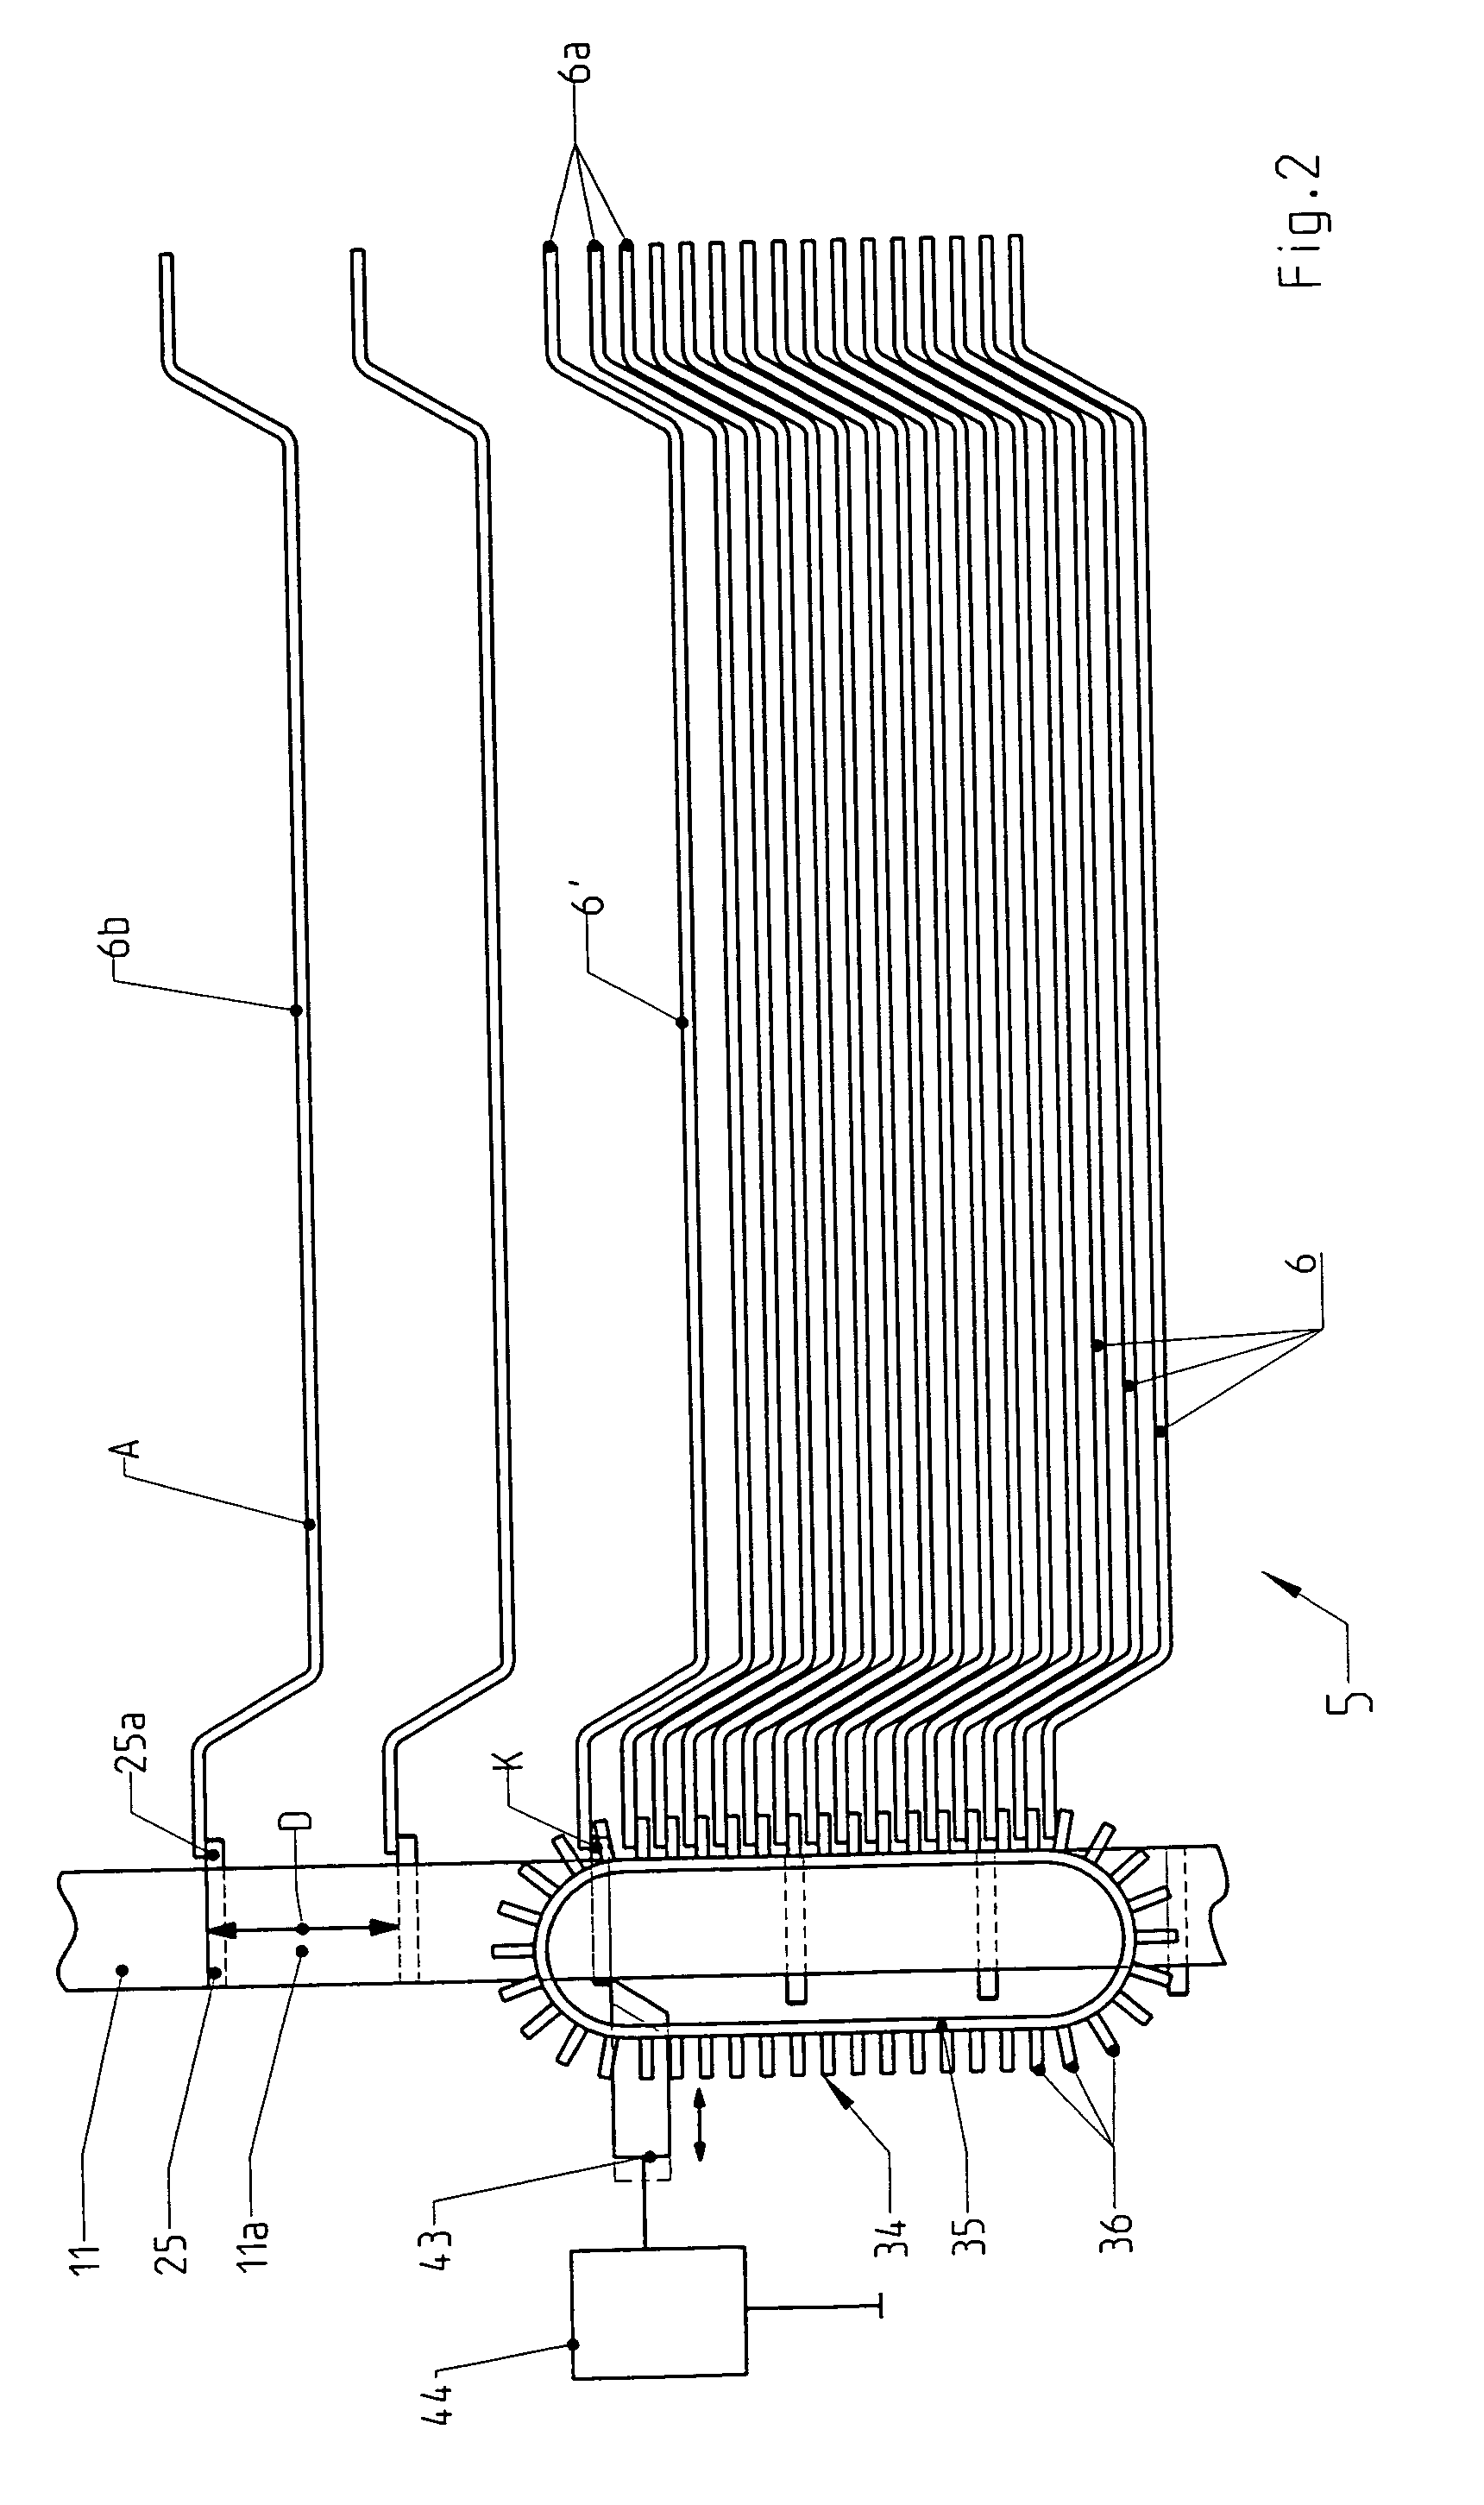 Conveying arrangement for processing printed products